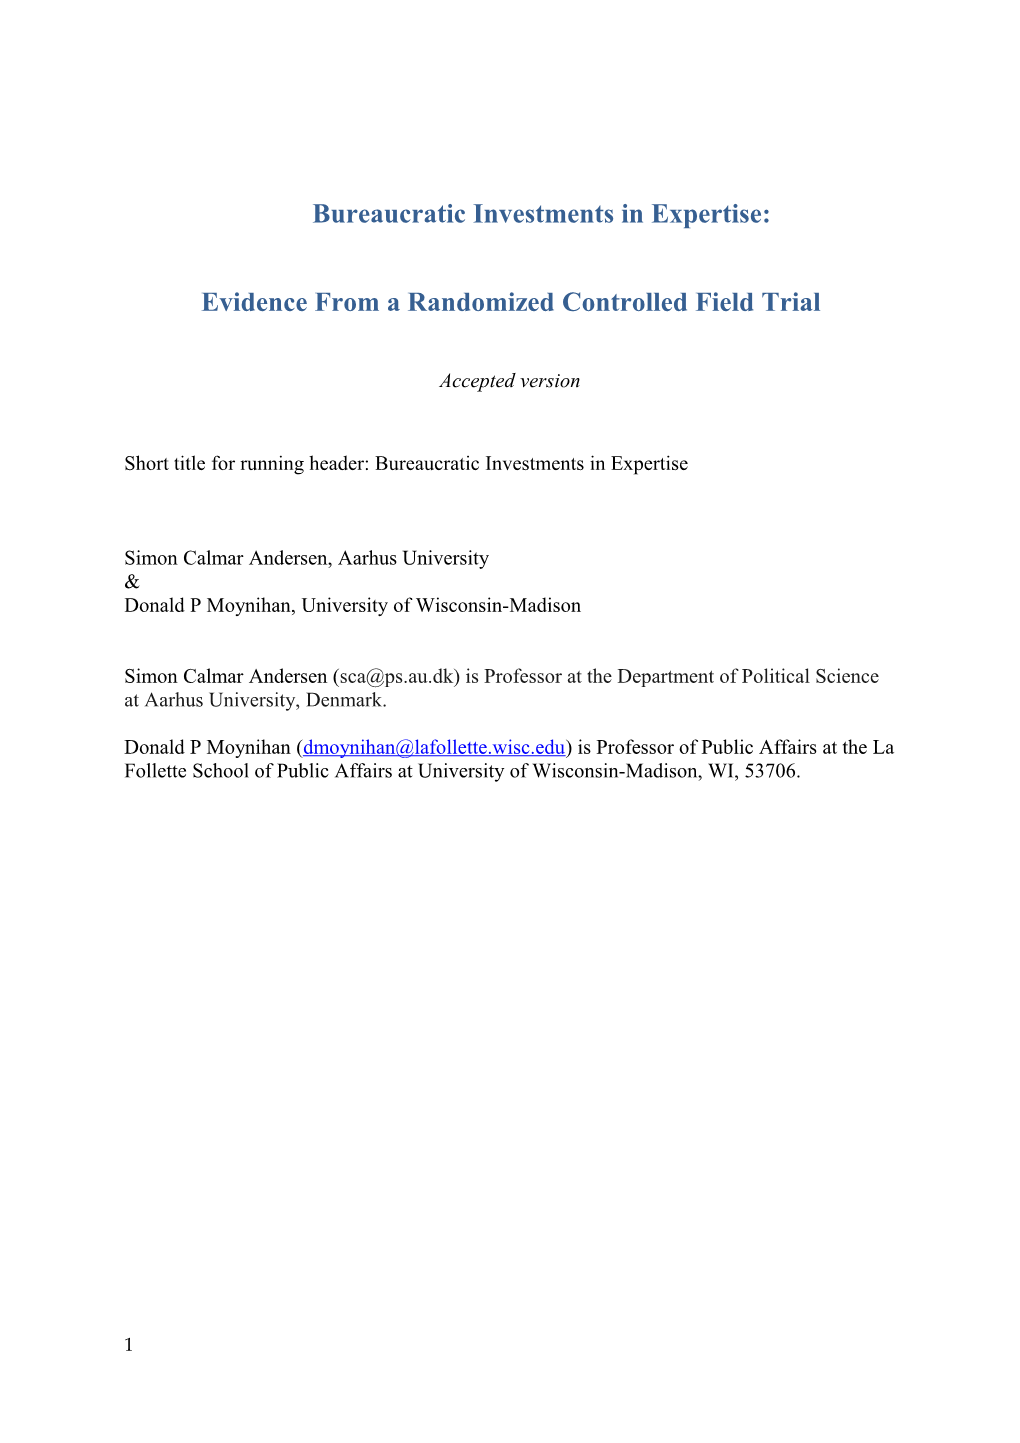 Evidence from a Randomized Controlled Field Trial